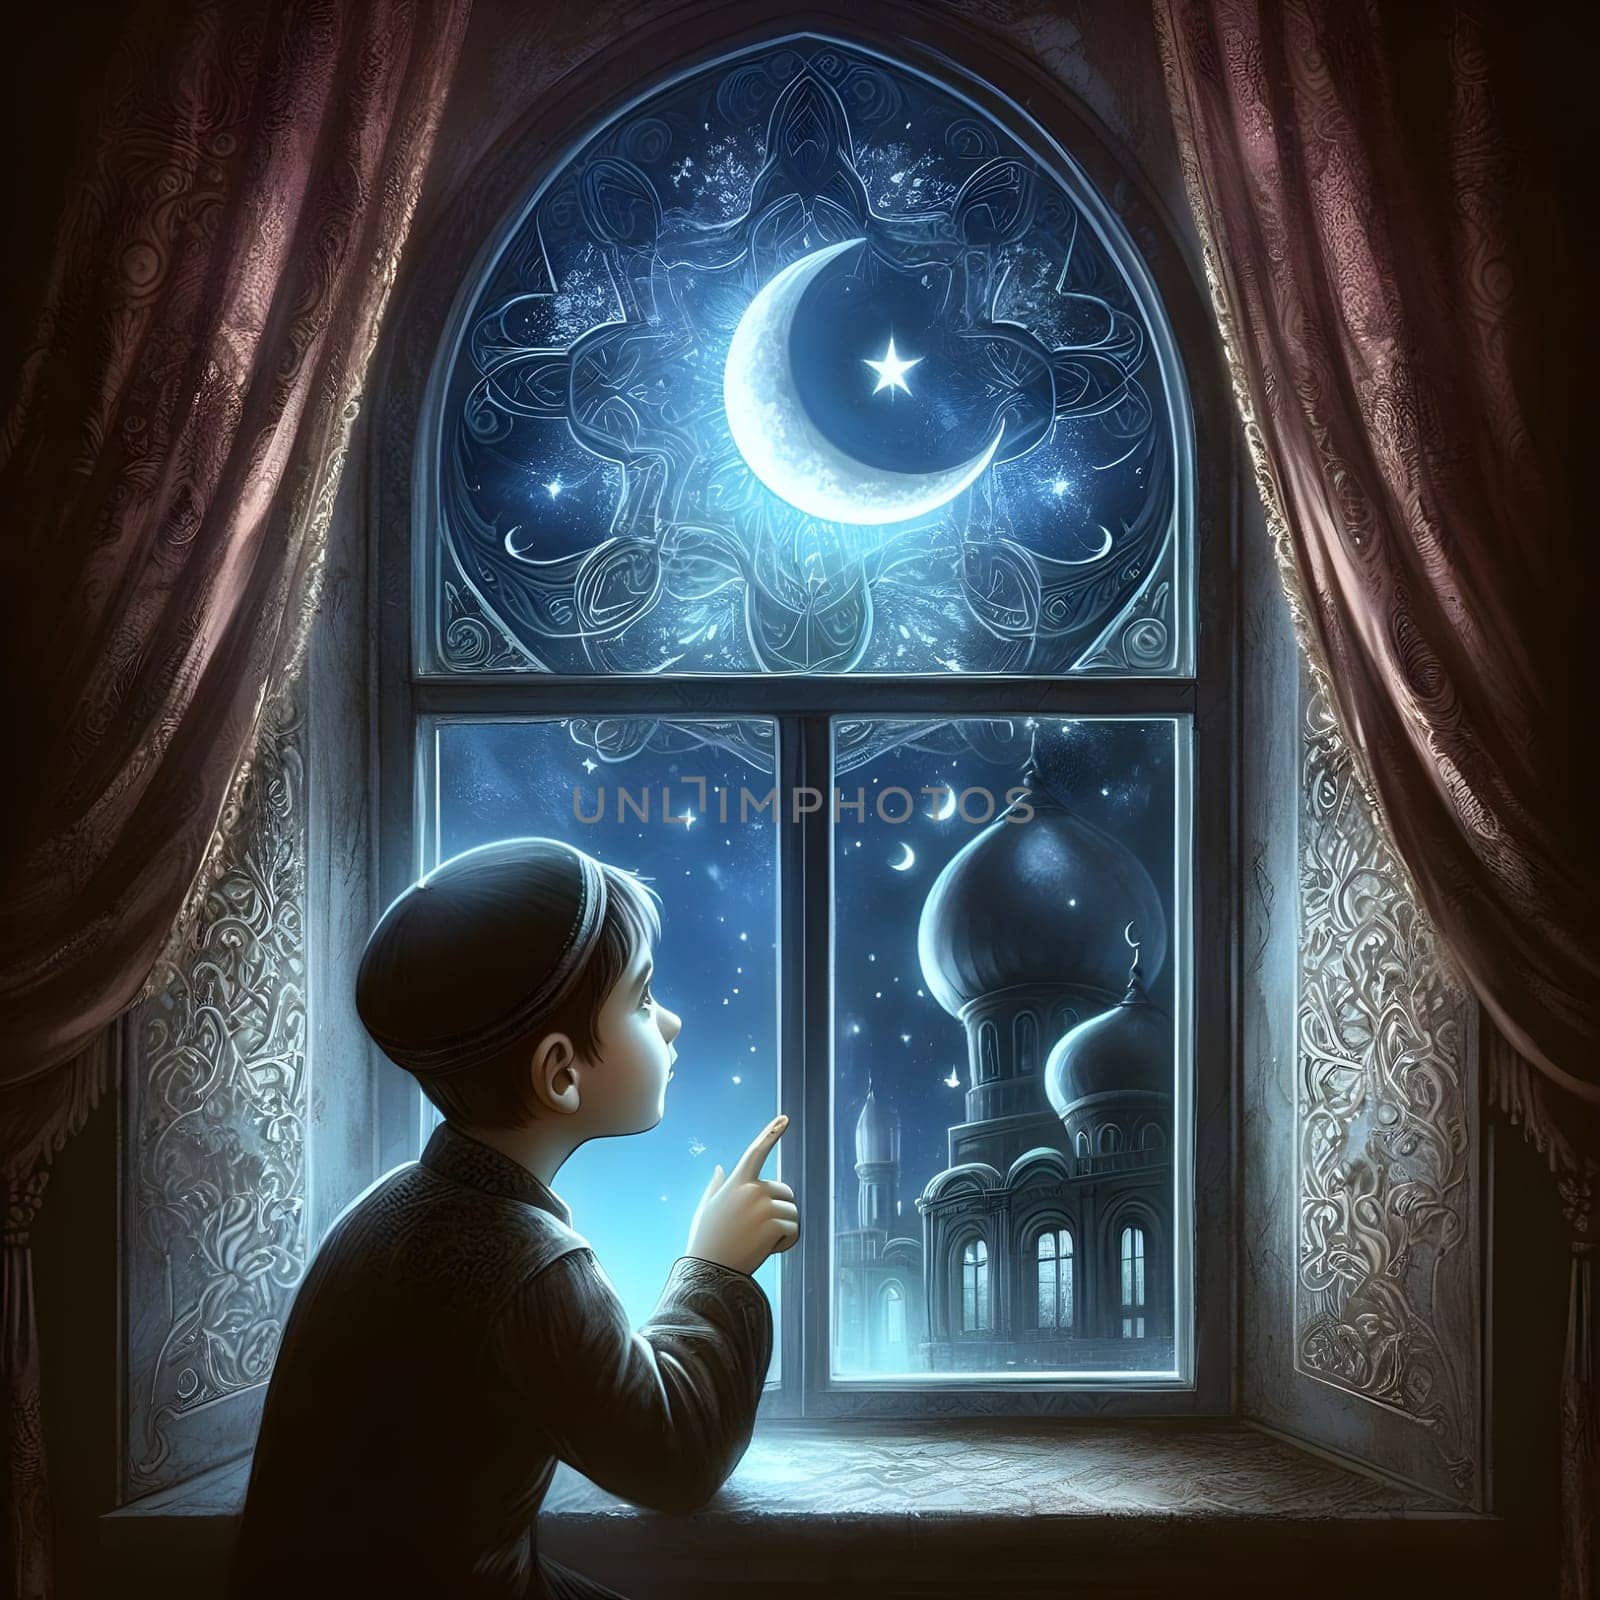 A cute child observing the crescent moon through an ornate window, with reflections of the night sky in his eyes. Last of Happy ramadan, ramadhan, ramazan by Designlab